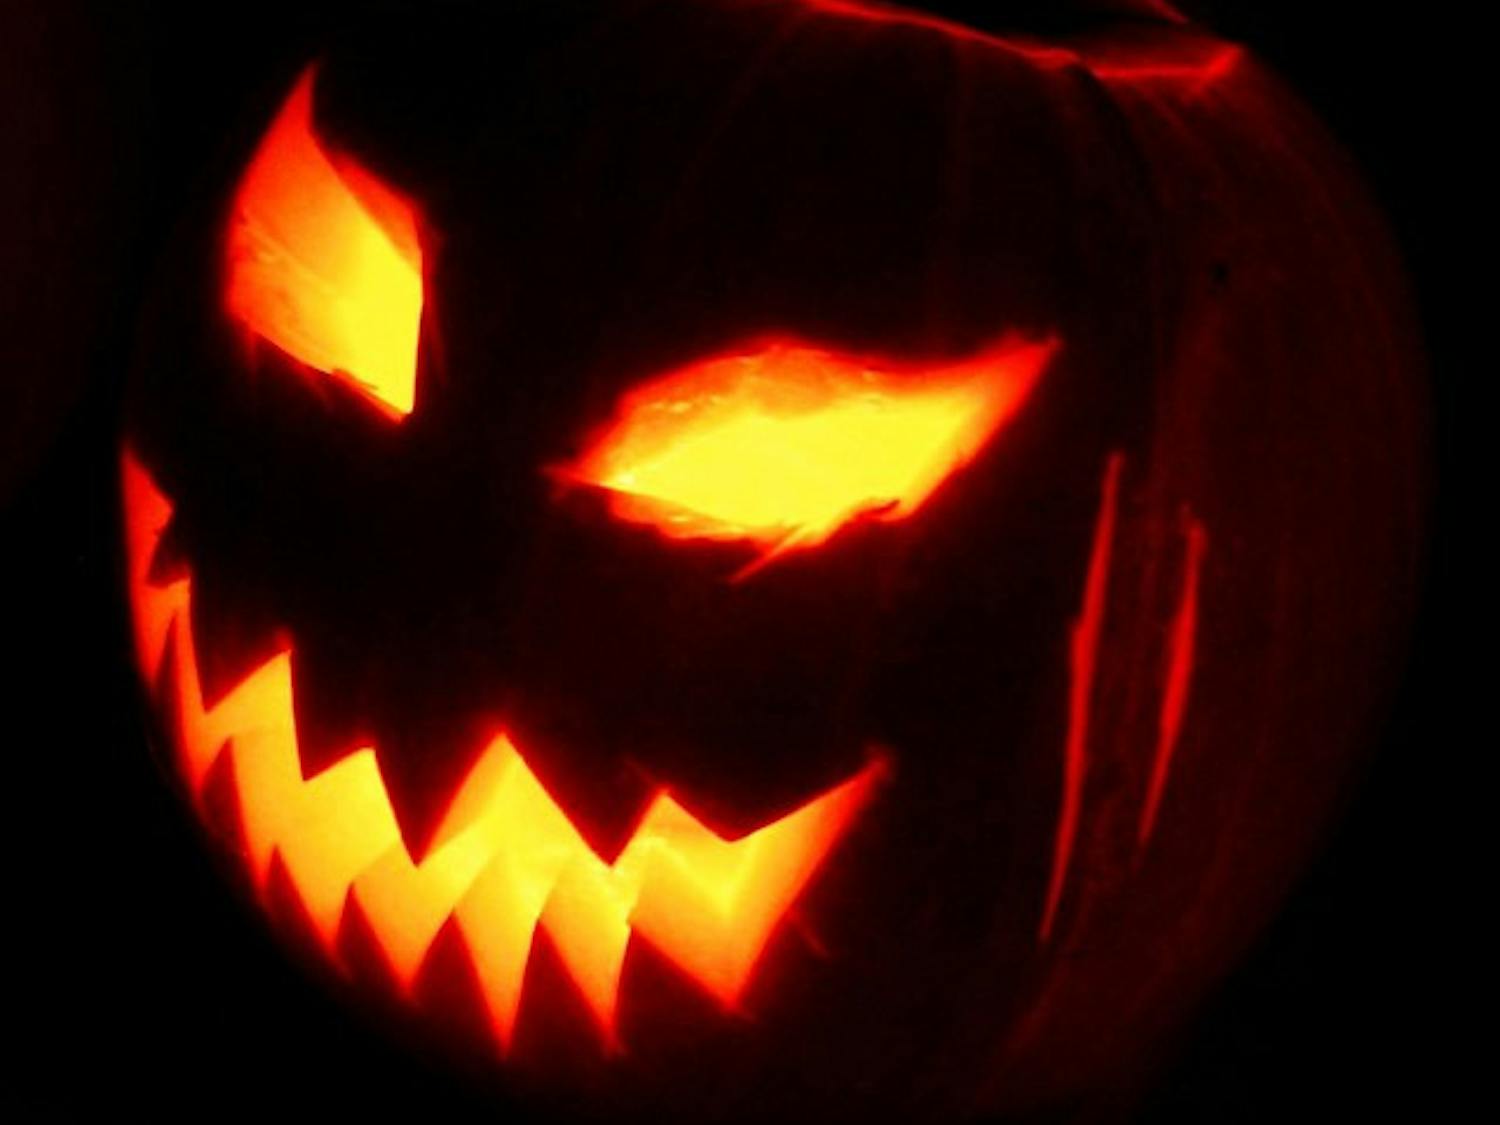 This Halloween, UB students shared their favorite scary movies | Toby Ord, Wikimedia Commons